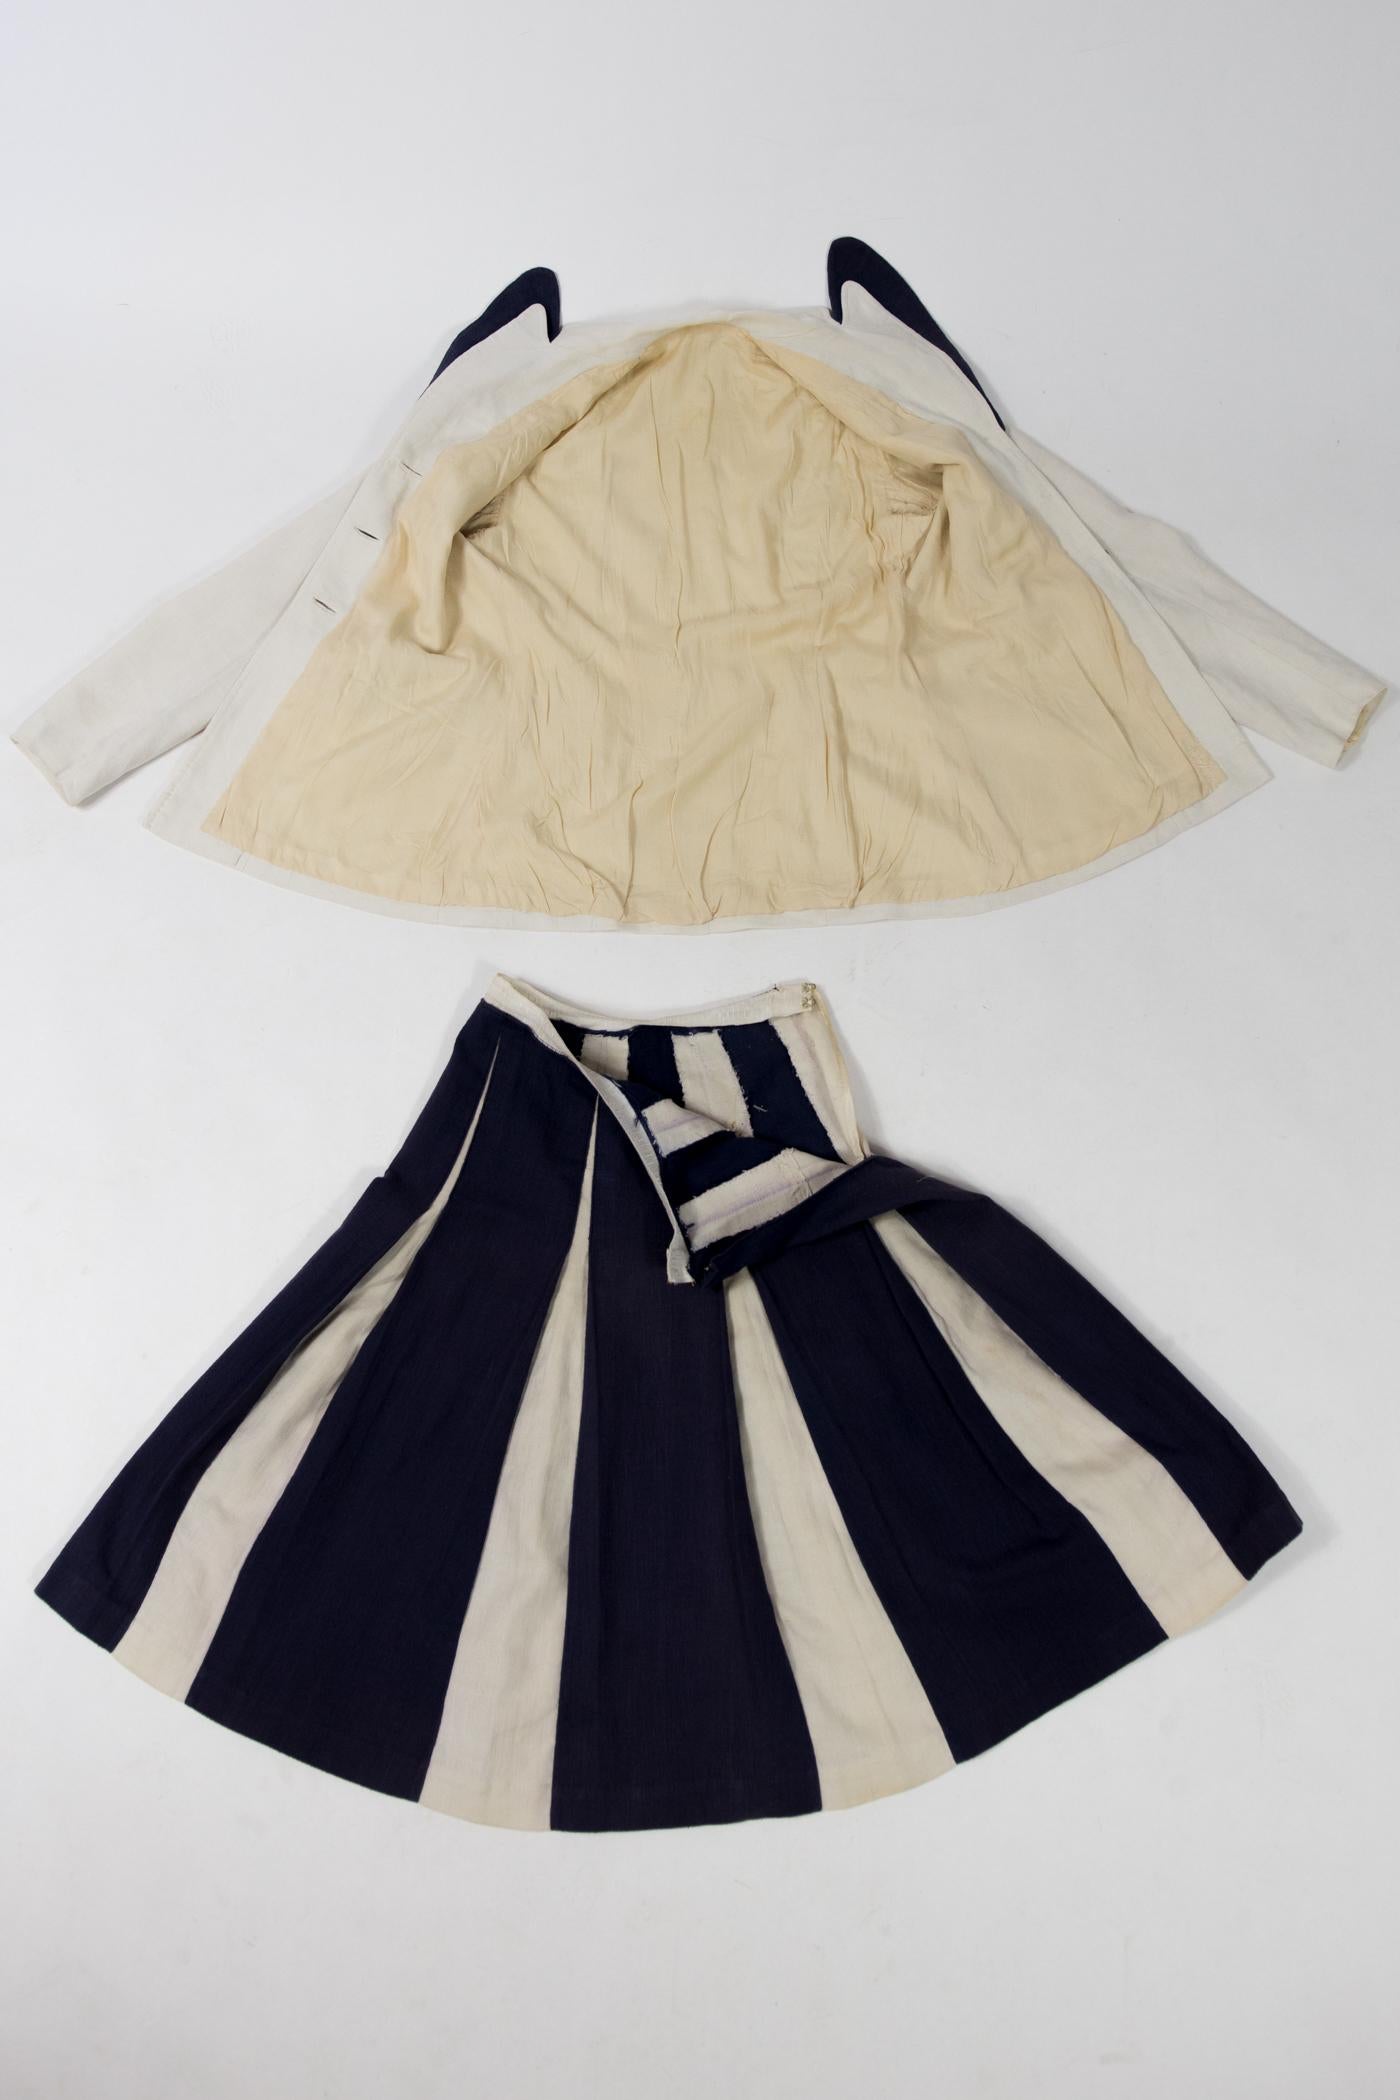 Circa 1945/1950

France

Touching dressmaker's skirt suit in navy and cream canvas in line with the post-war Bar style. Fitted jacket in white linen / cotton canvas highlighted with navy canvas applied to the rounded collar and to the back of the